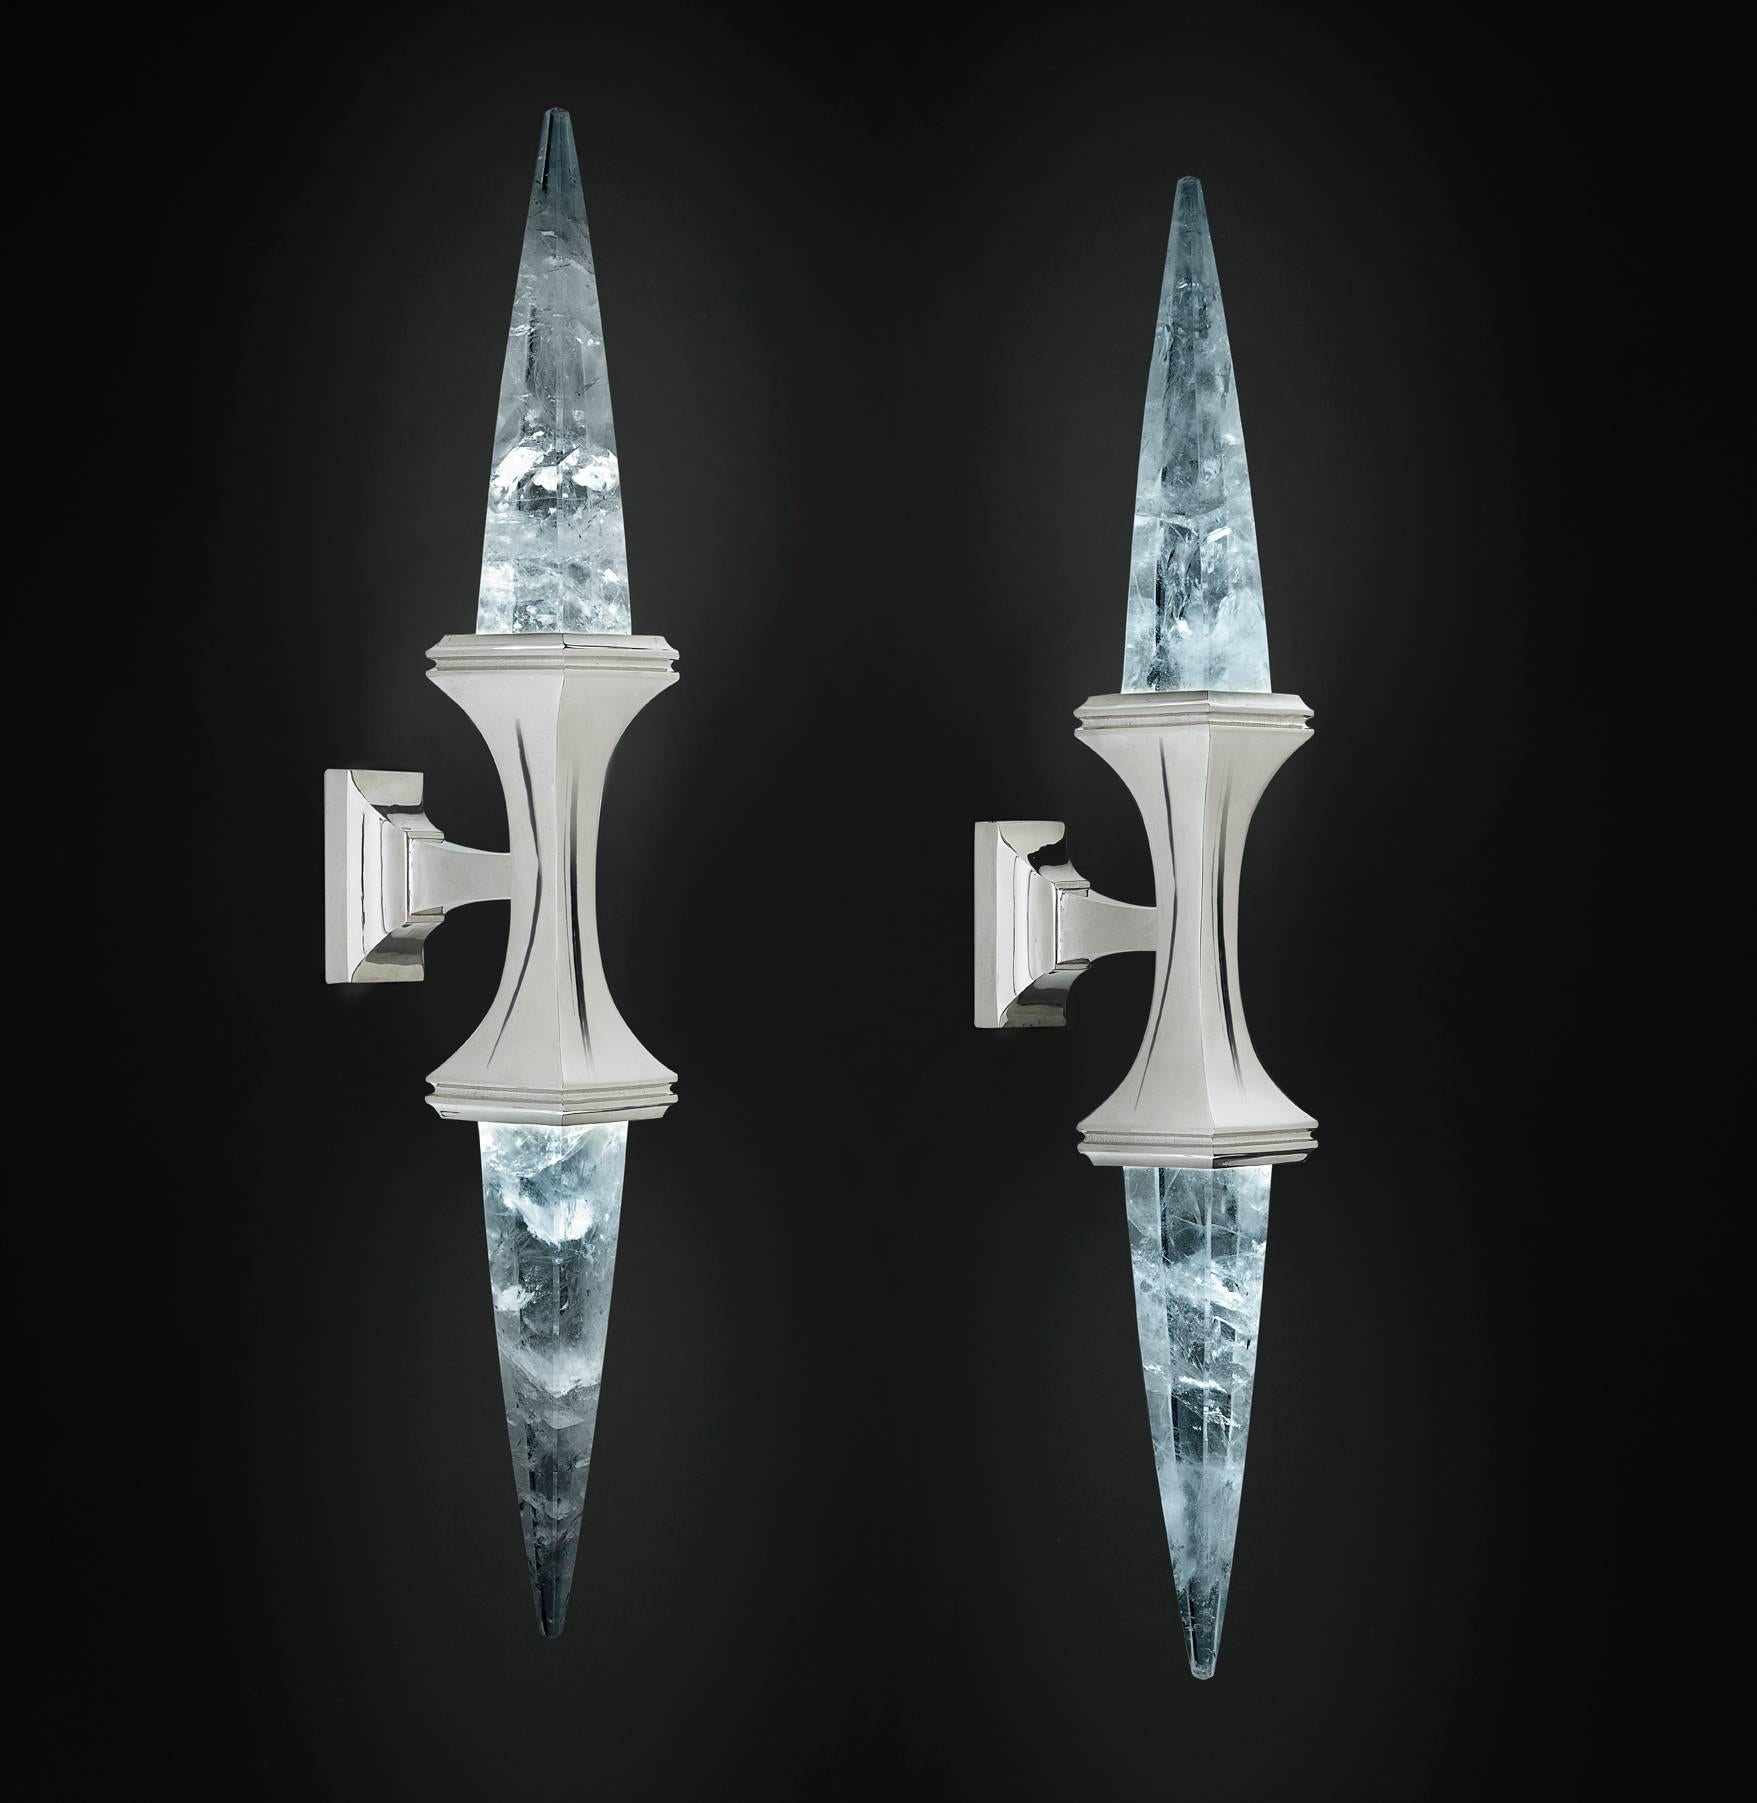 Rock crystal  quartz wall light I, silver edition.
Original model design by Alexandre Vossion and made since 2014.
These wall sconces are handmade in bronze in Paris.
Each workers who made this wall sconce belongs to a corporation and worked also